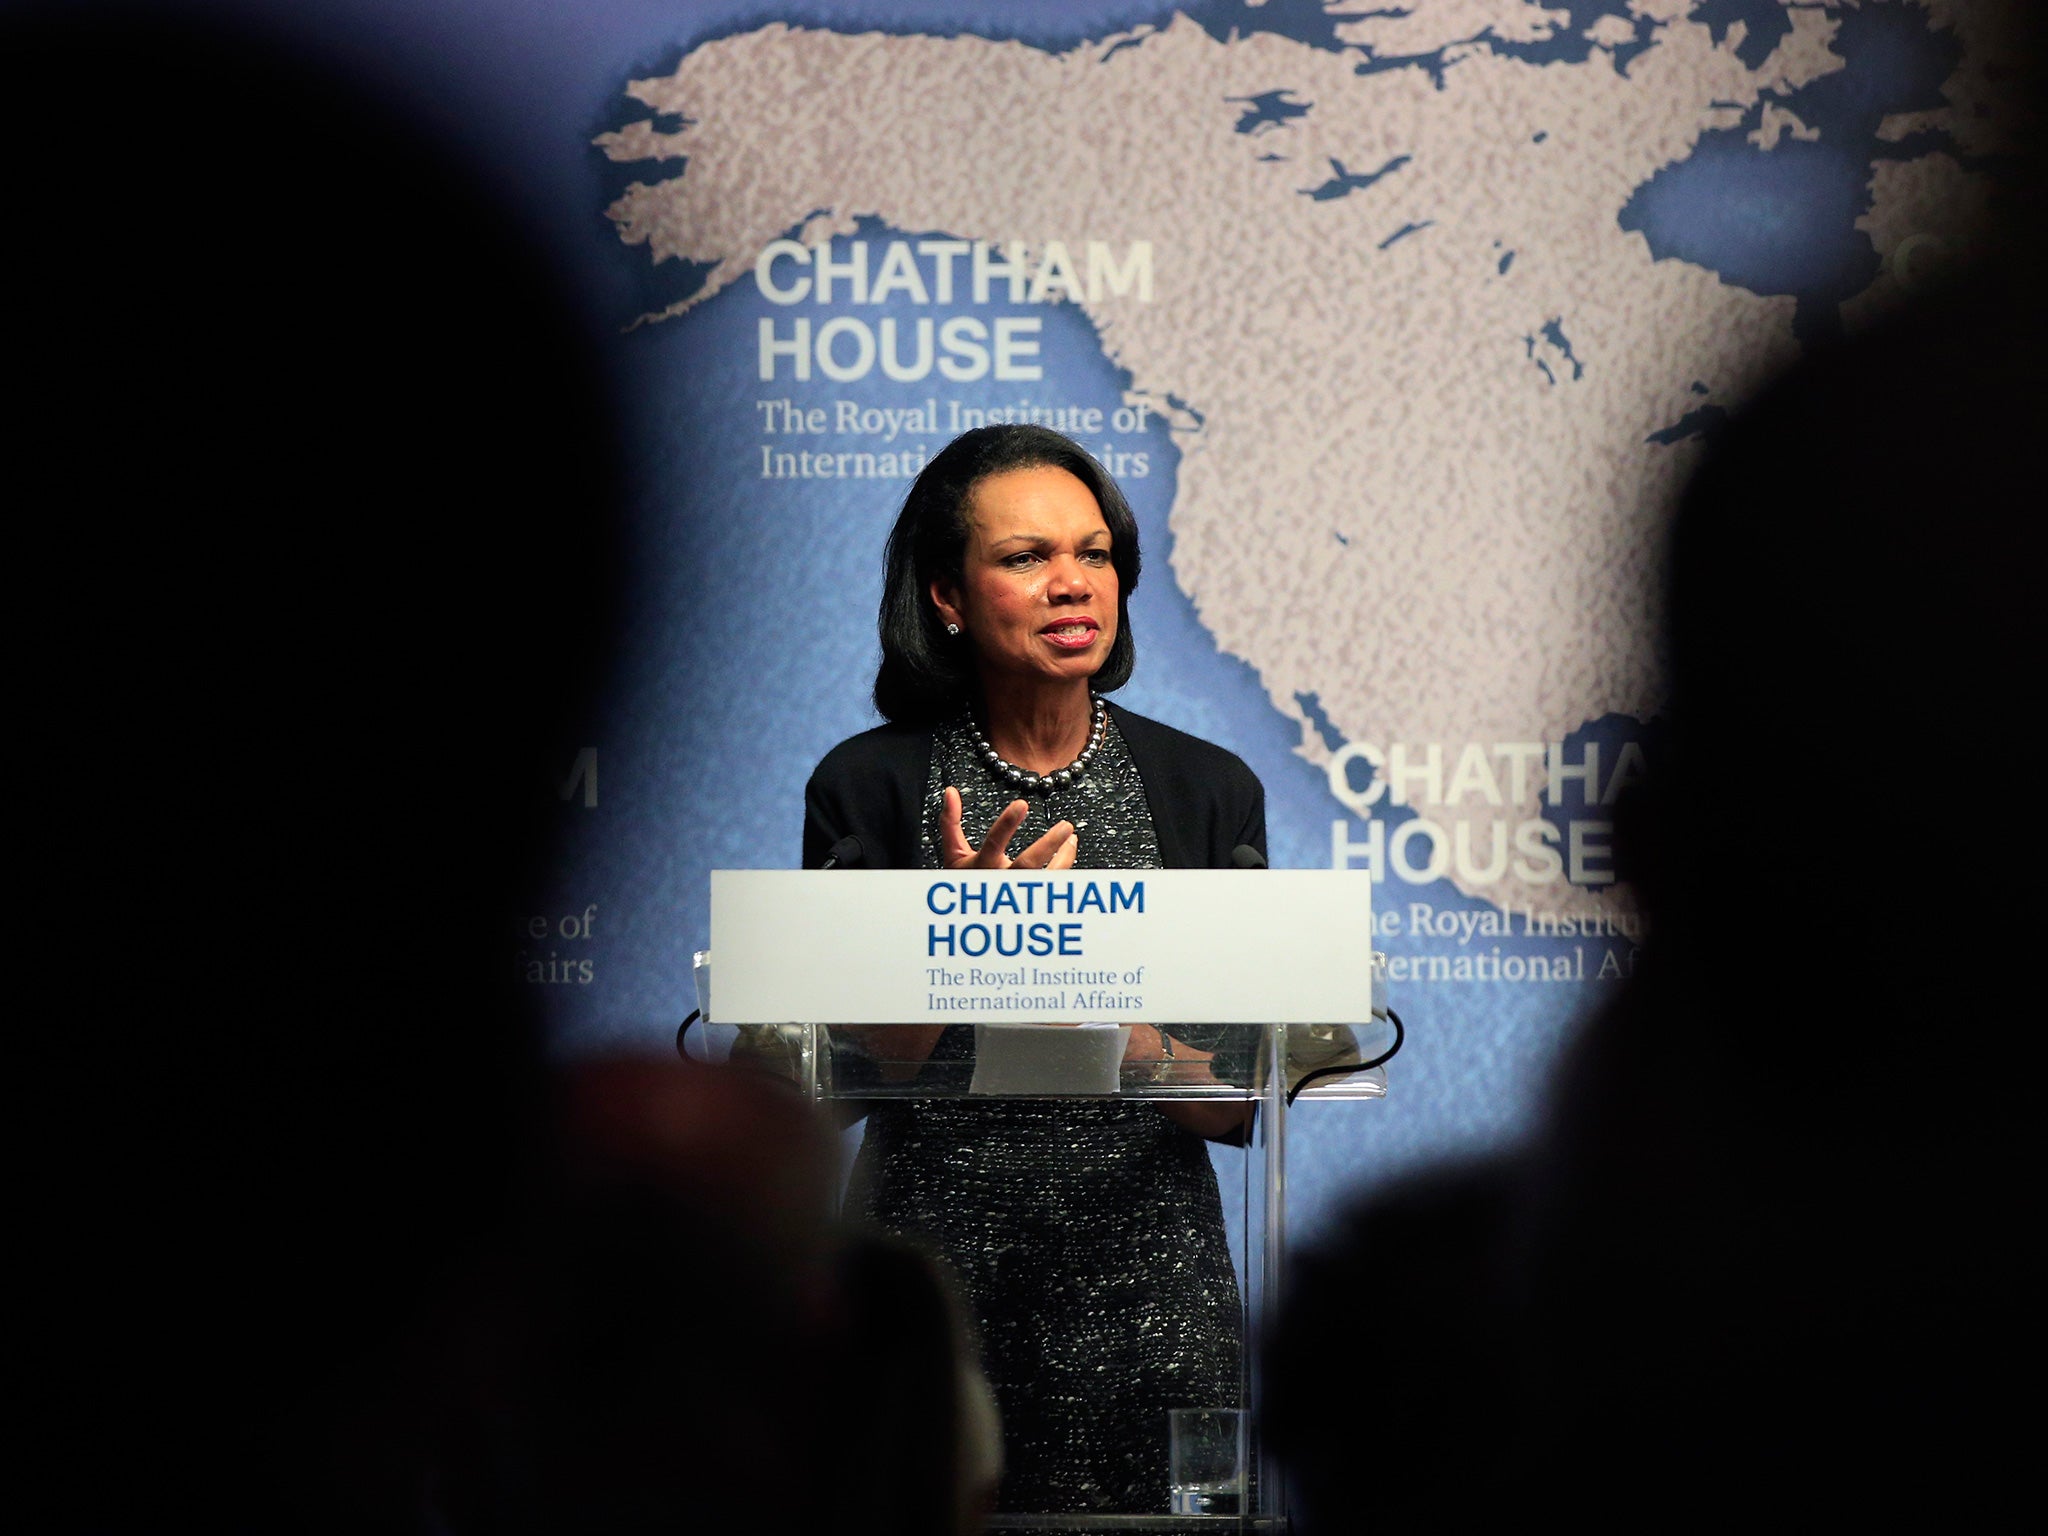 Former US Secretary of State Condoleezza Rice speaking at Chatham House in London